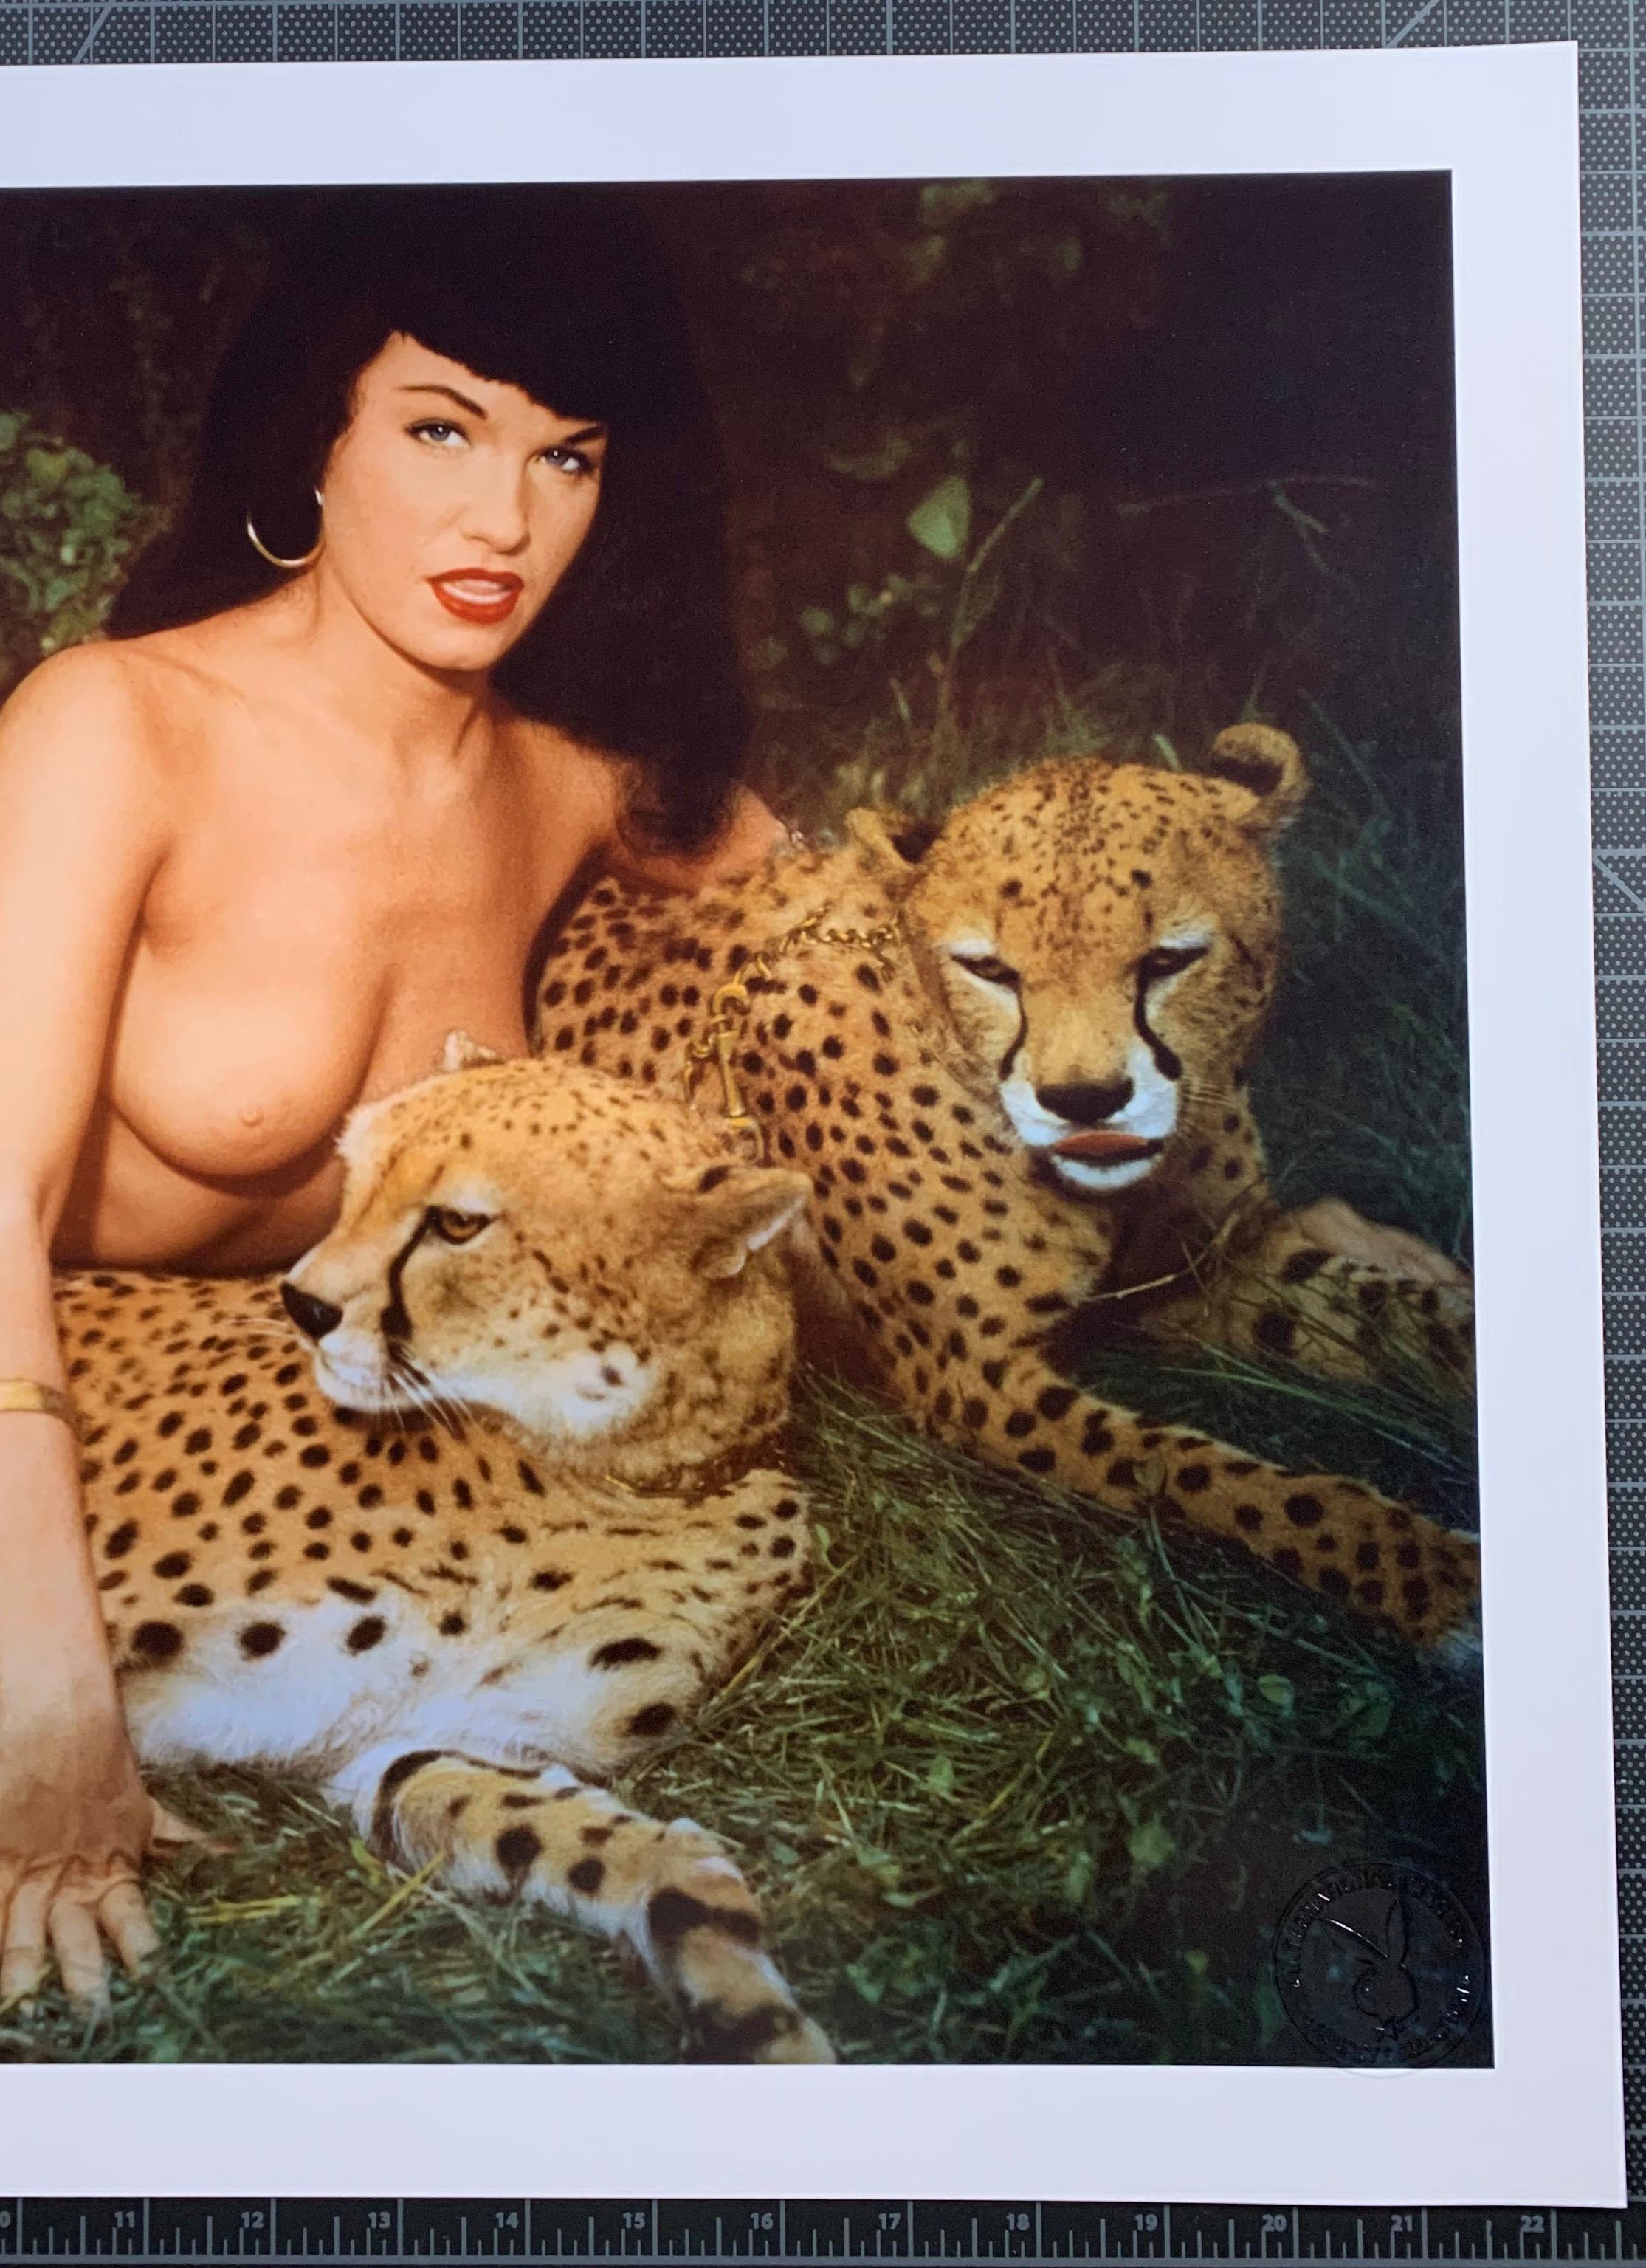 Playboy Legacy Collection “Bunny’s Honey” original fine art print edition 33 of 75 featuring legendary model and actress Bettie Page. The image was shot in 1954 by renowned photographer, Bunny Yeager and was published in the May 1994 issue of